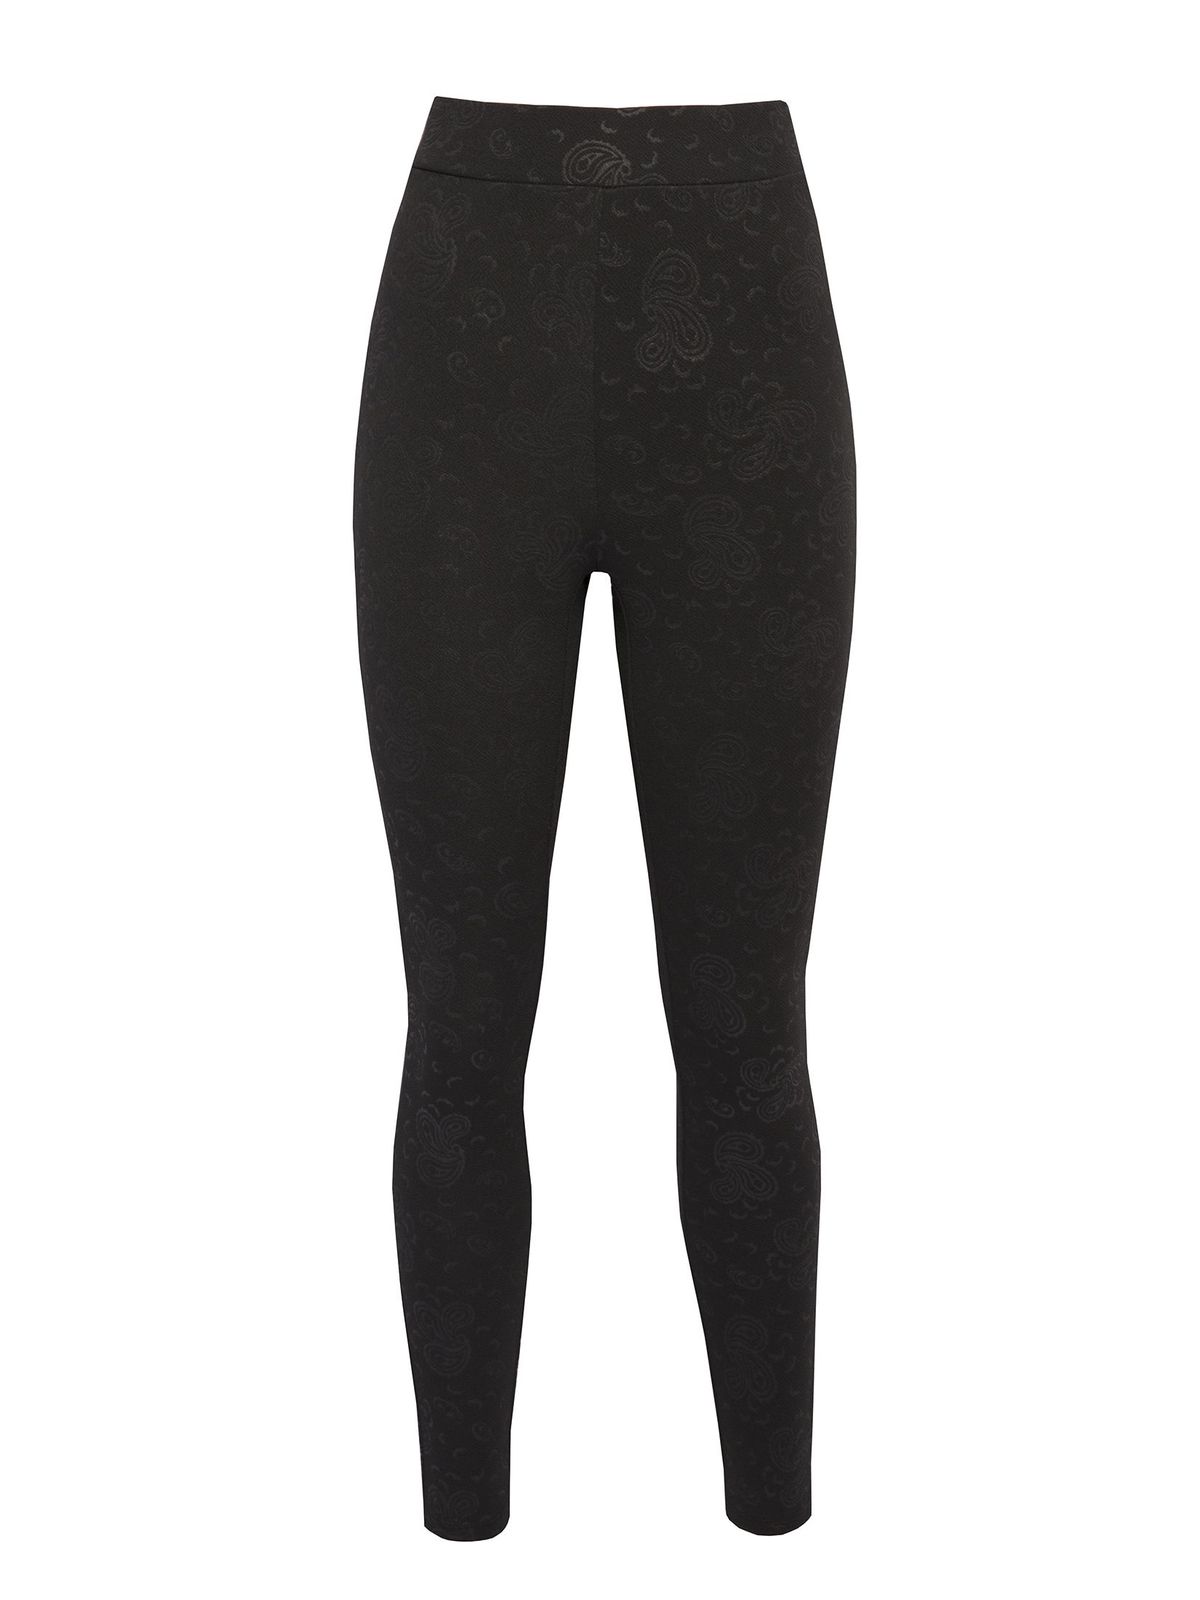 Black tights high waisted textured crepe 5 - StarShinerS.com